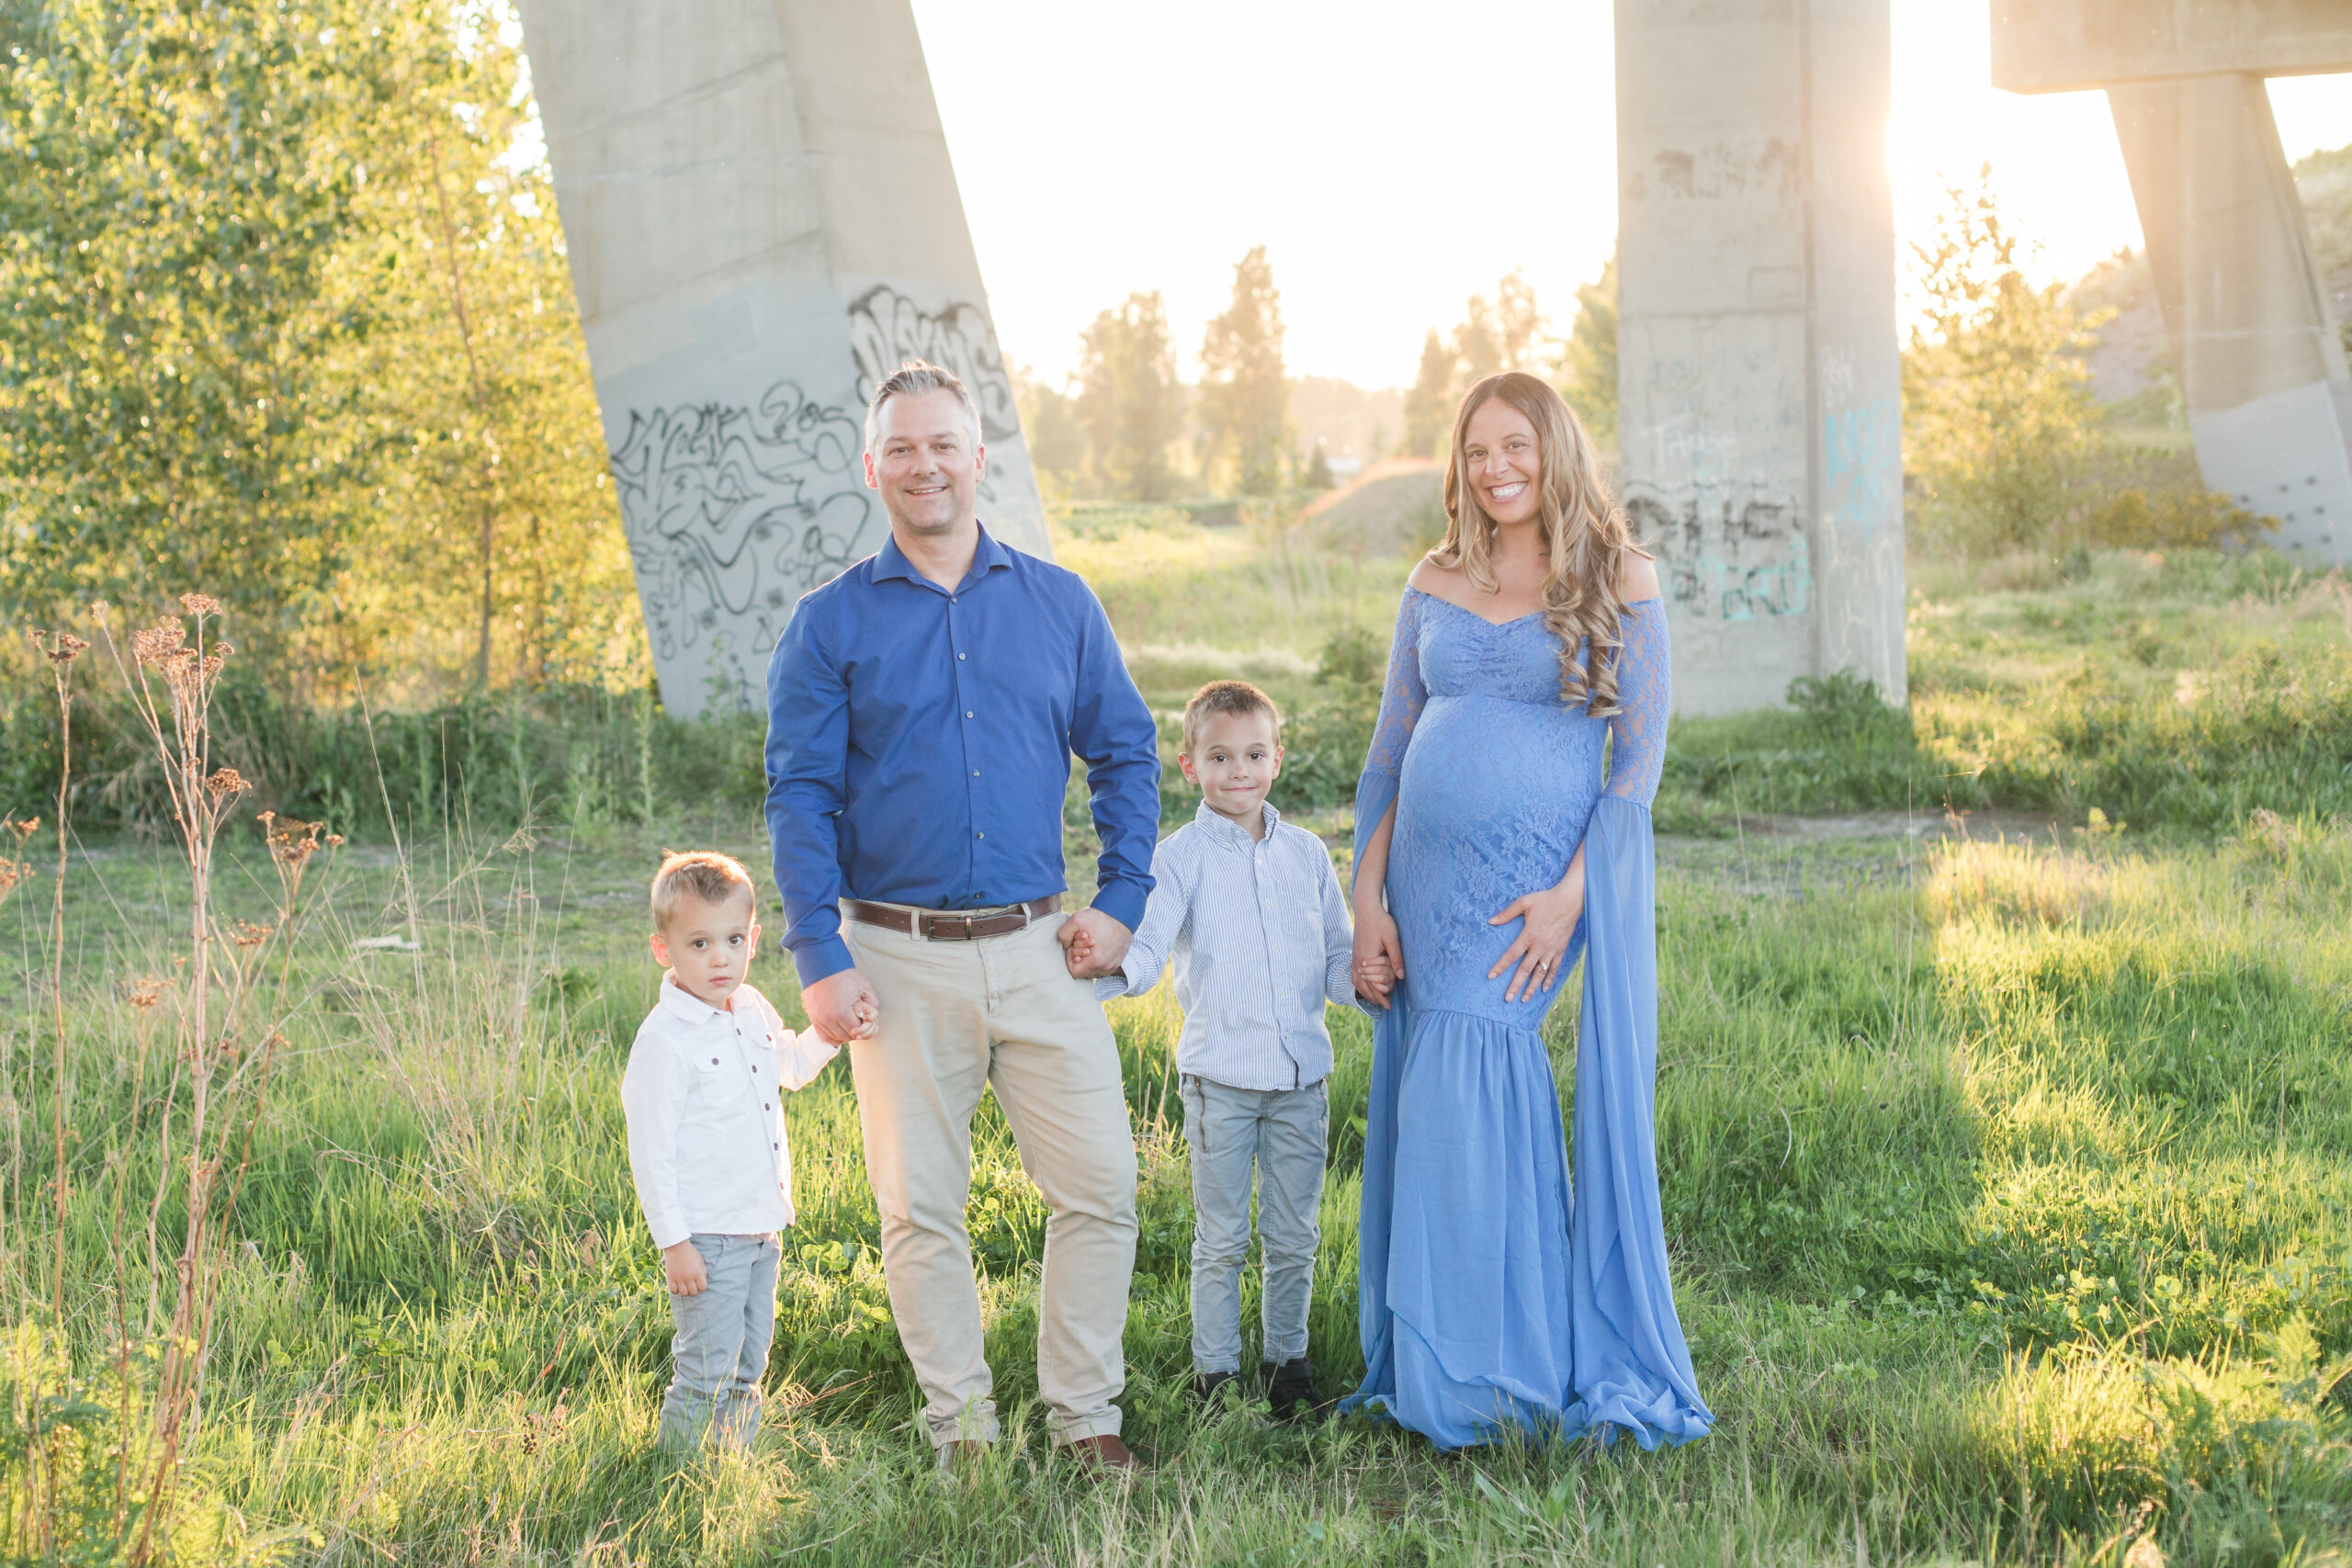 Soon to be family of 5 uses kelowna midwives